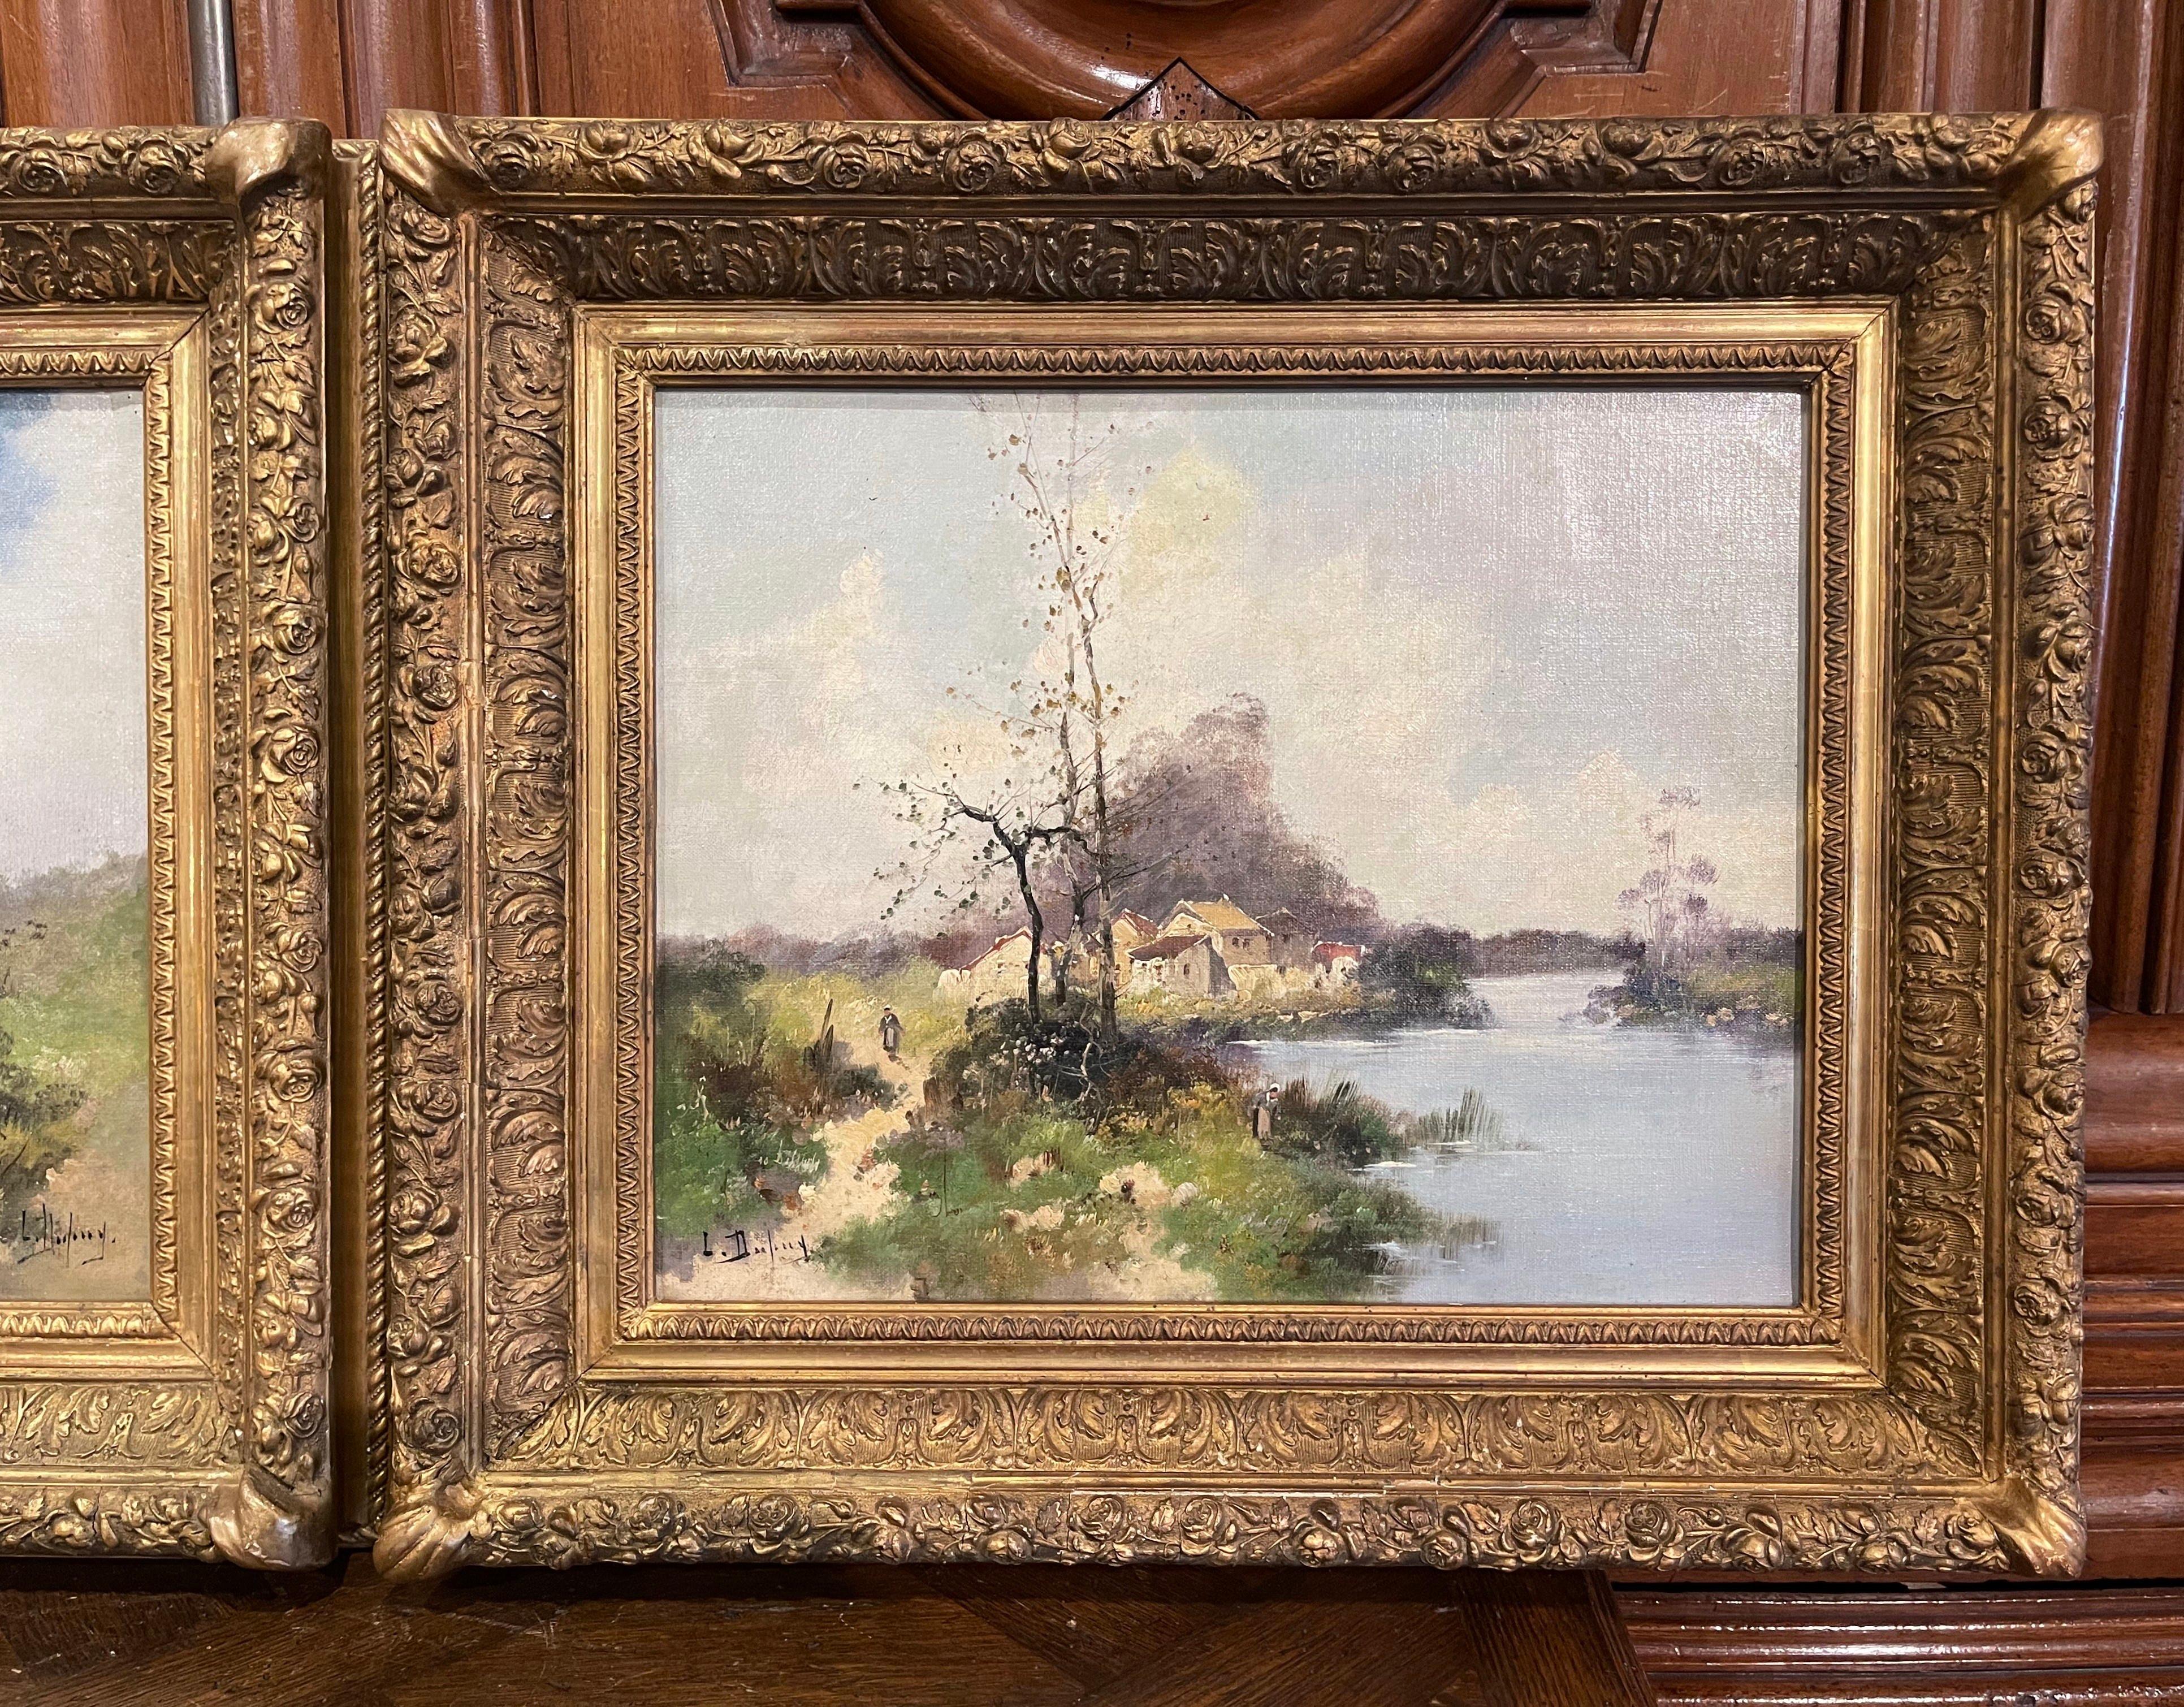 Hand-Painted Pair of 19th Century Landscapes Paintings Signed L. Dupuy for E. Galien-Laloue For Sale